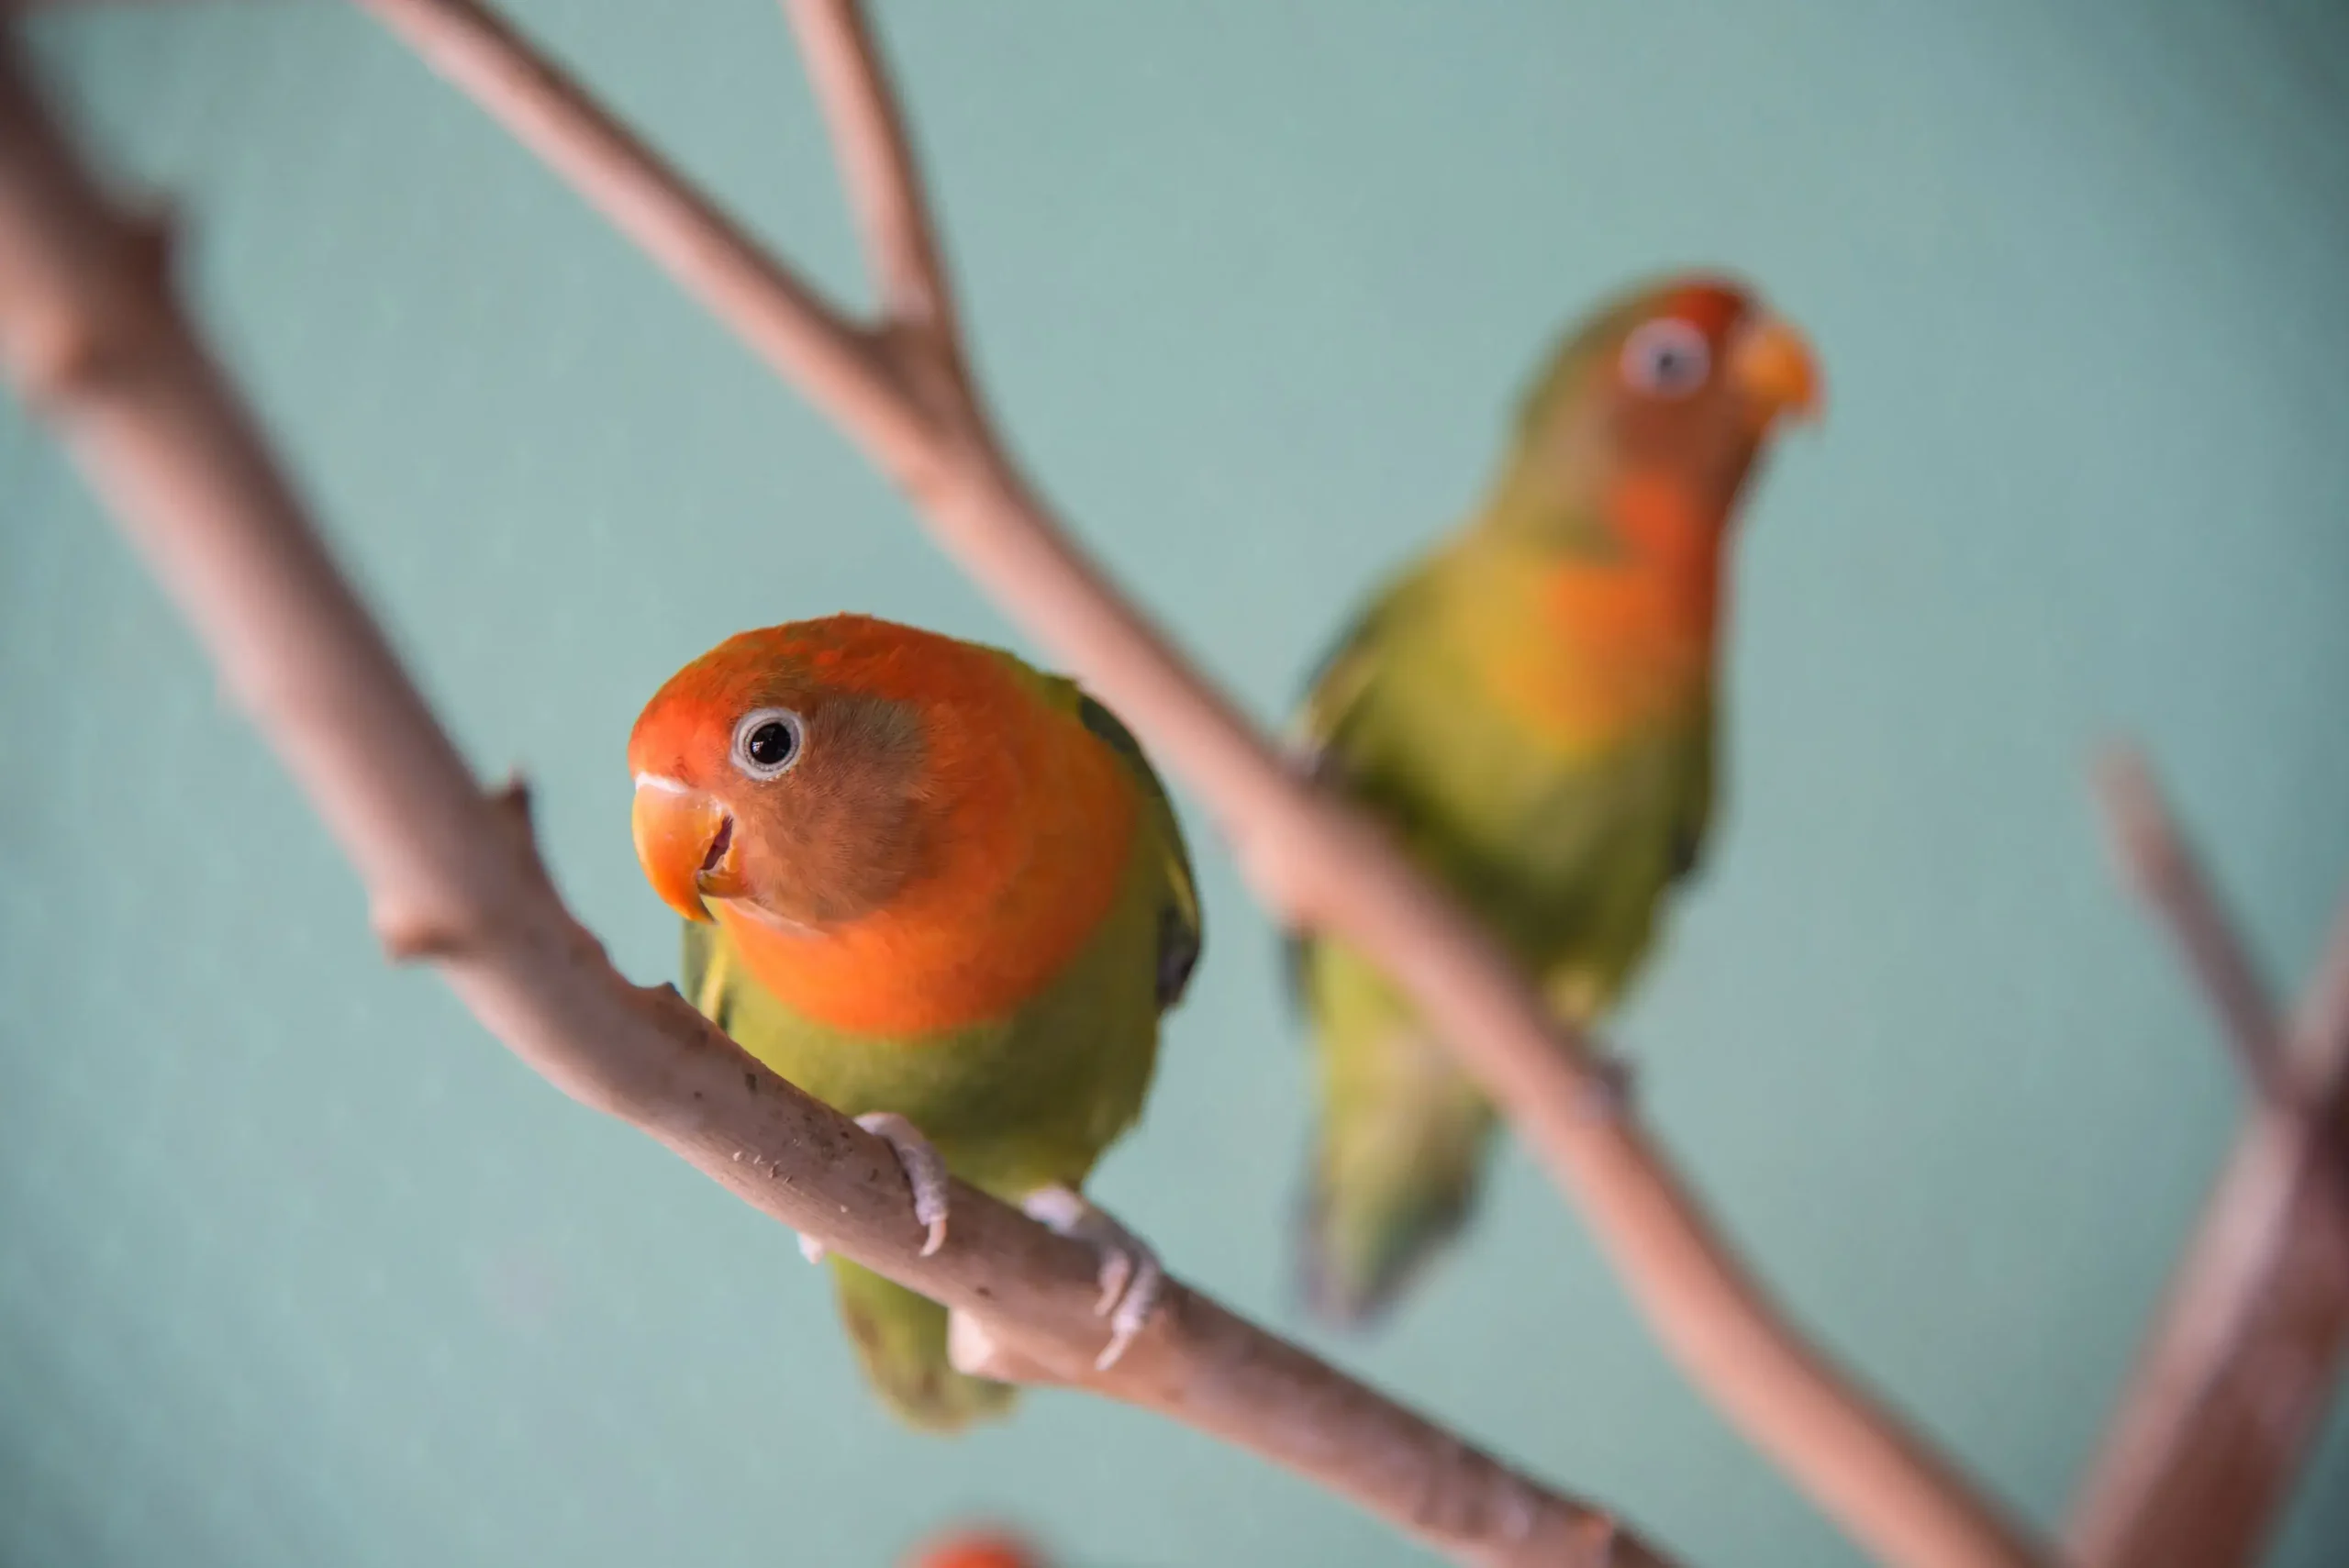 How to Take Care of a Lovebird?